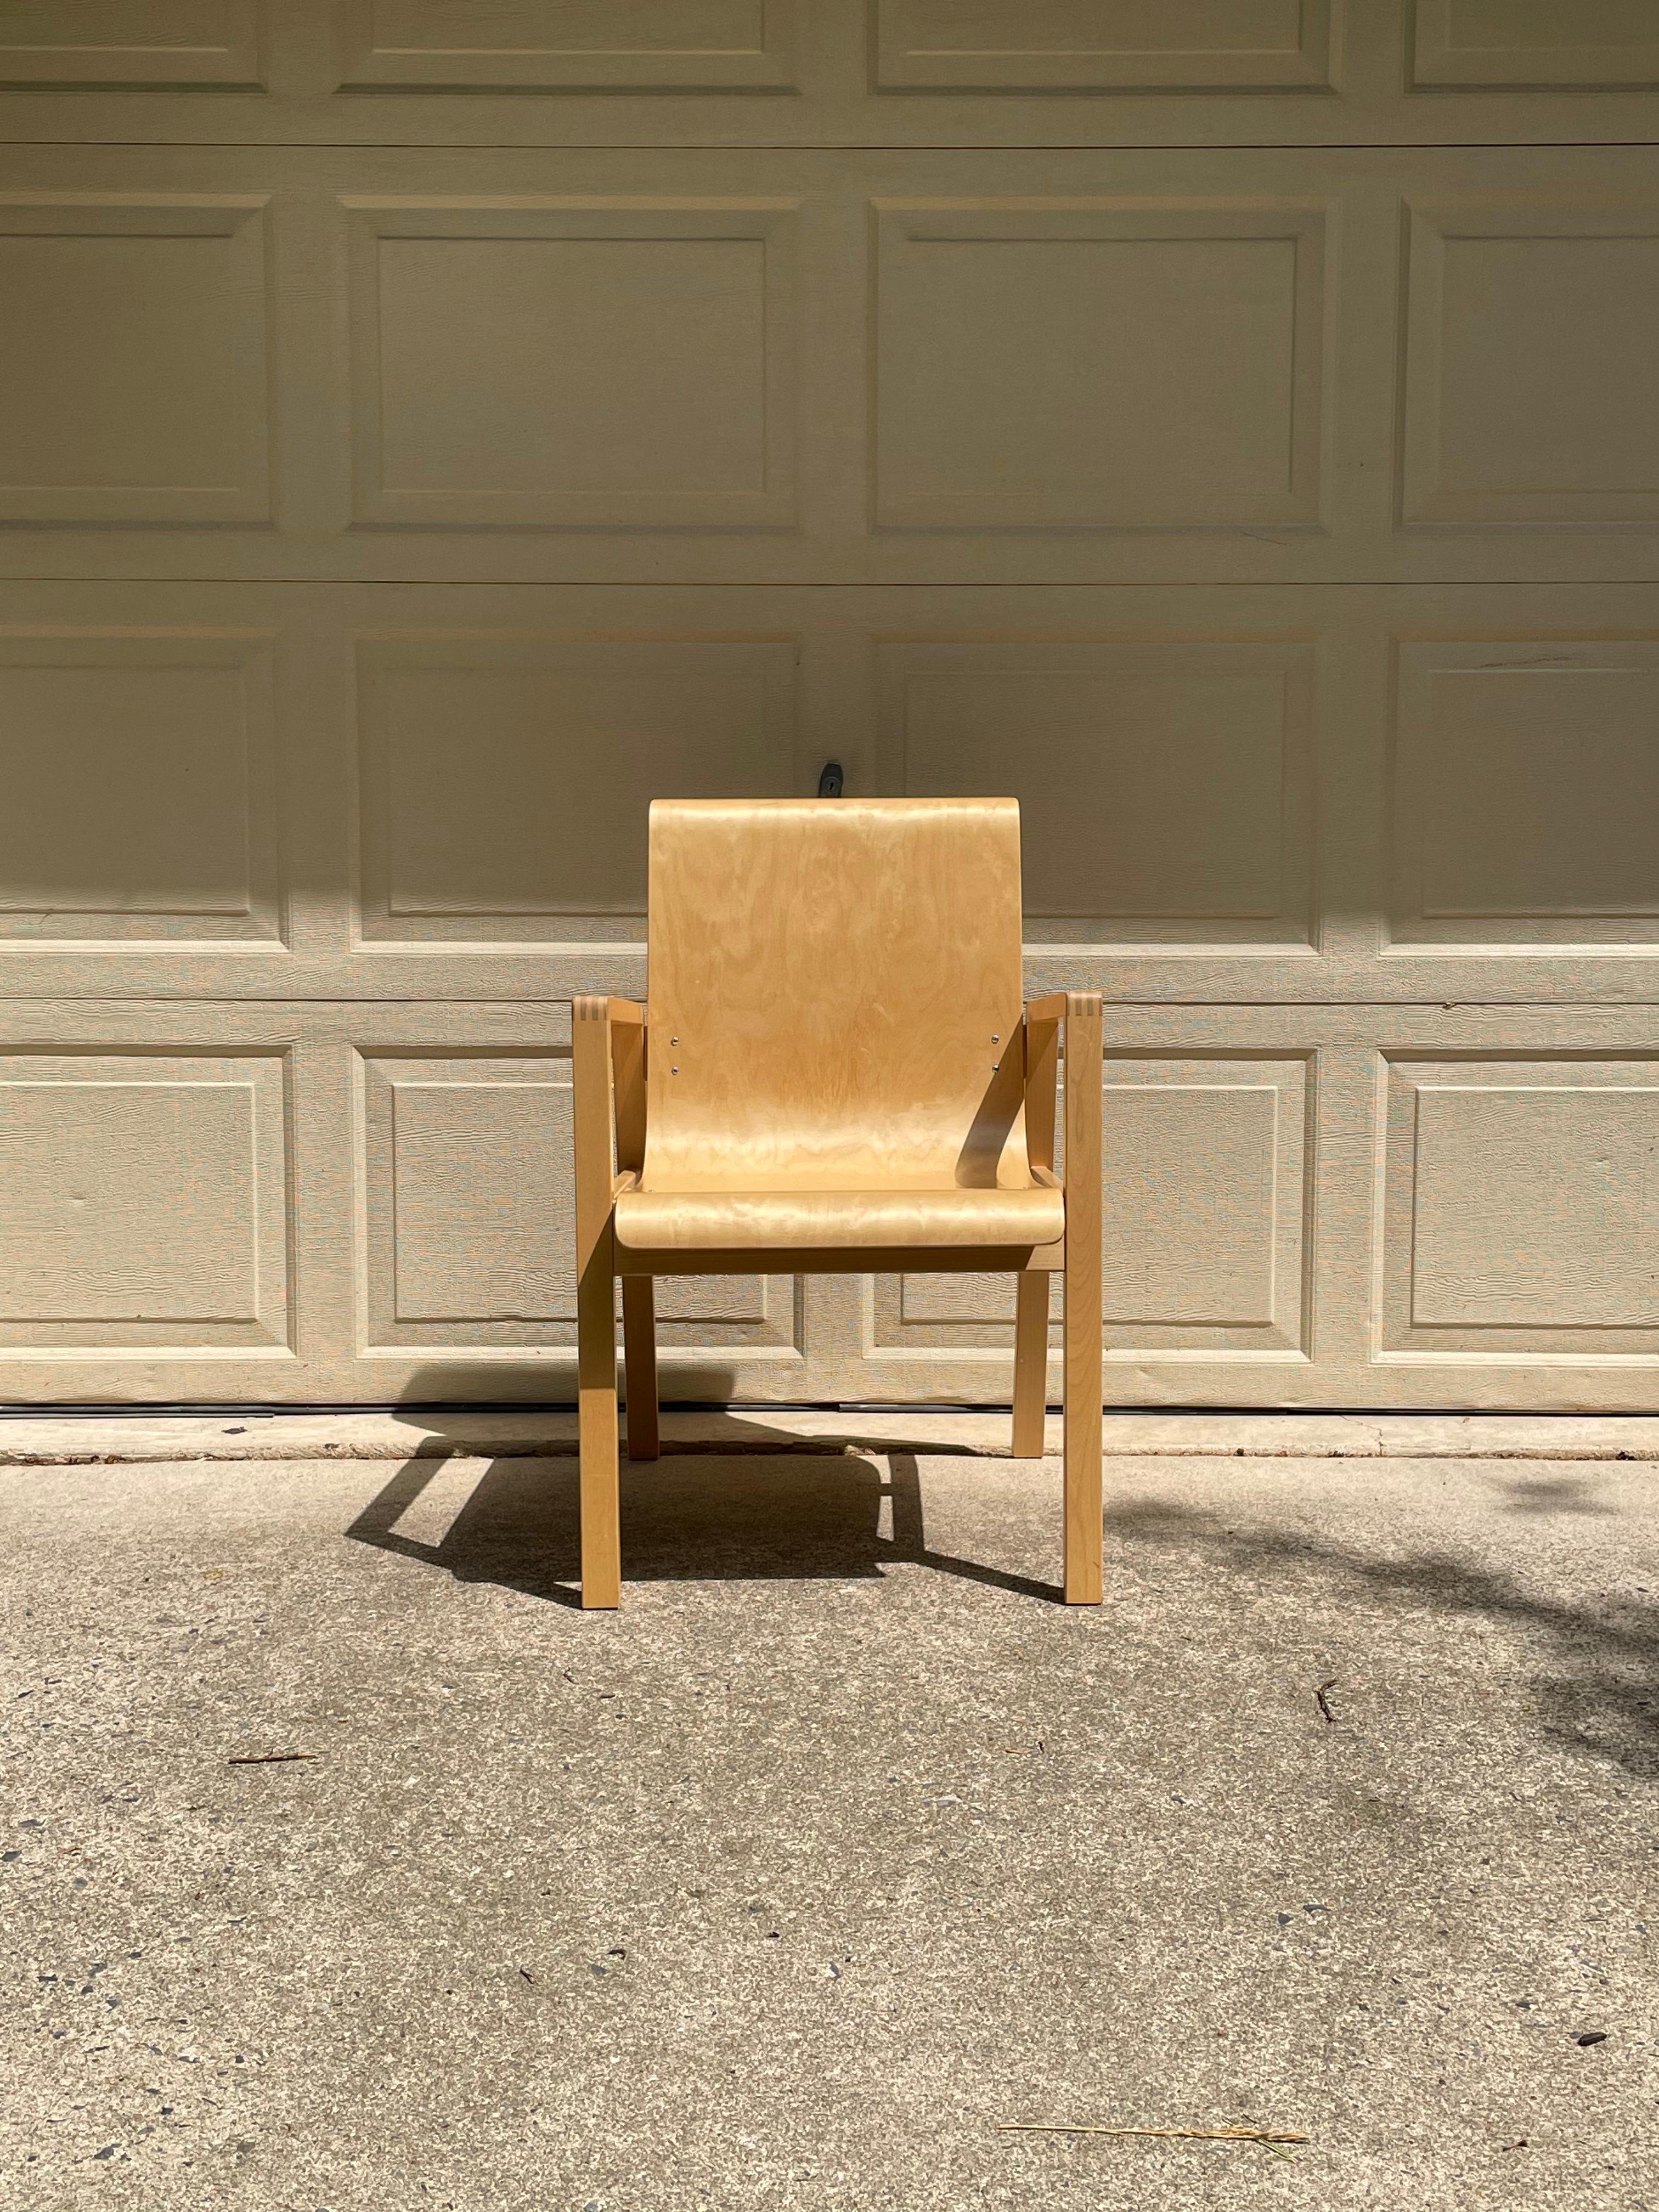 Armchair 403 “Hallway” is a stackable chair originally designed by Alvar Aalto for the Paimio Sanatorium in Finland in 1932.
Finished with a clear lacquer, the armchair’s frame is made of solid birchwood, the seat shell is formed from pressed birch